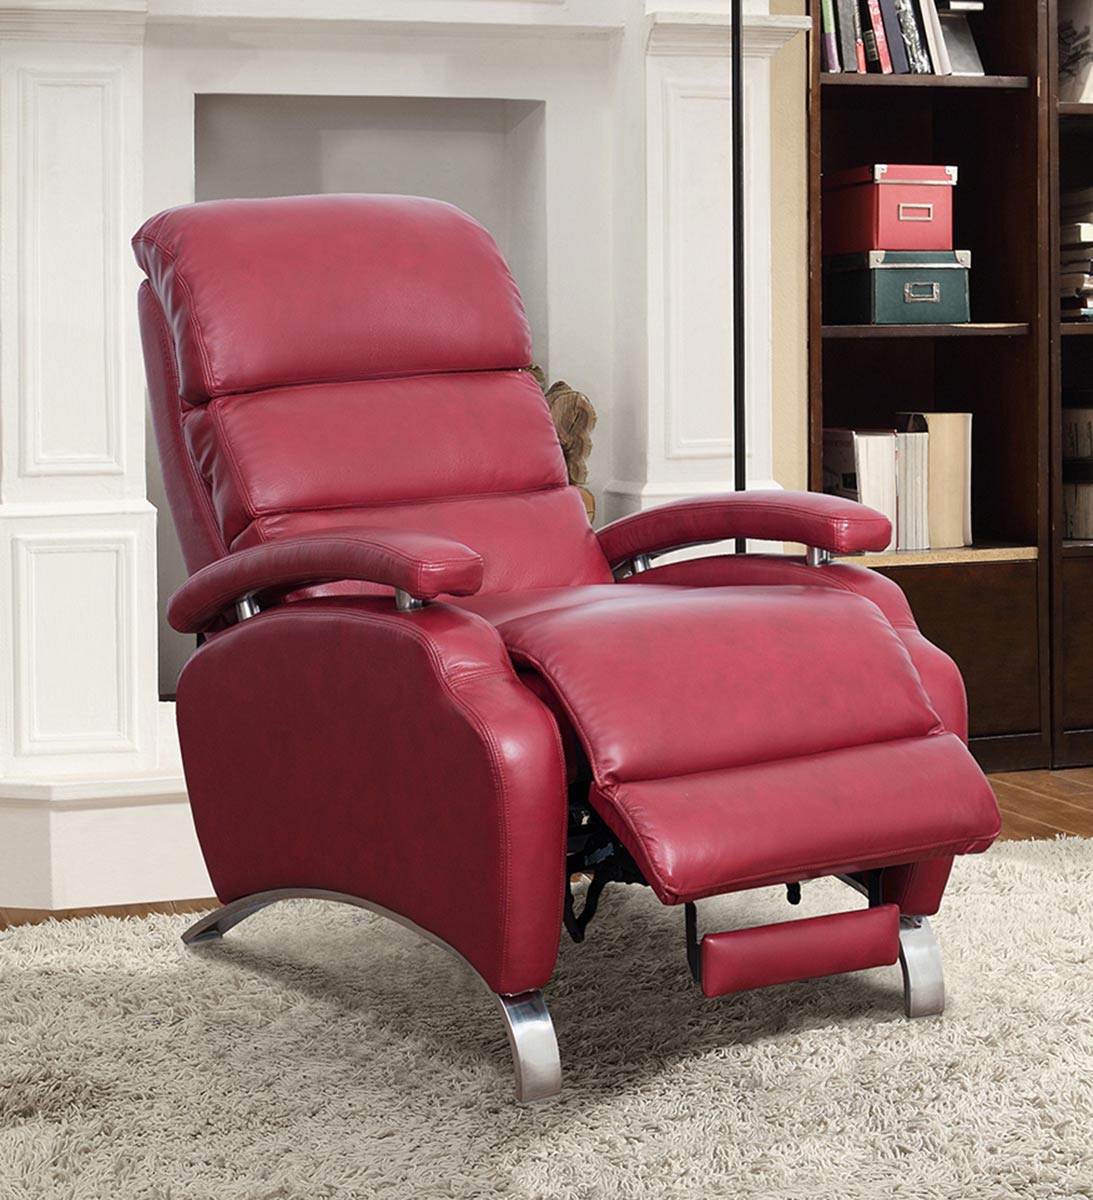 Barcalounger Giovanni Recliner Chair - Stargo Red/Leather Match